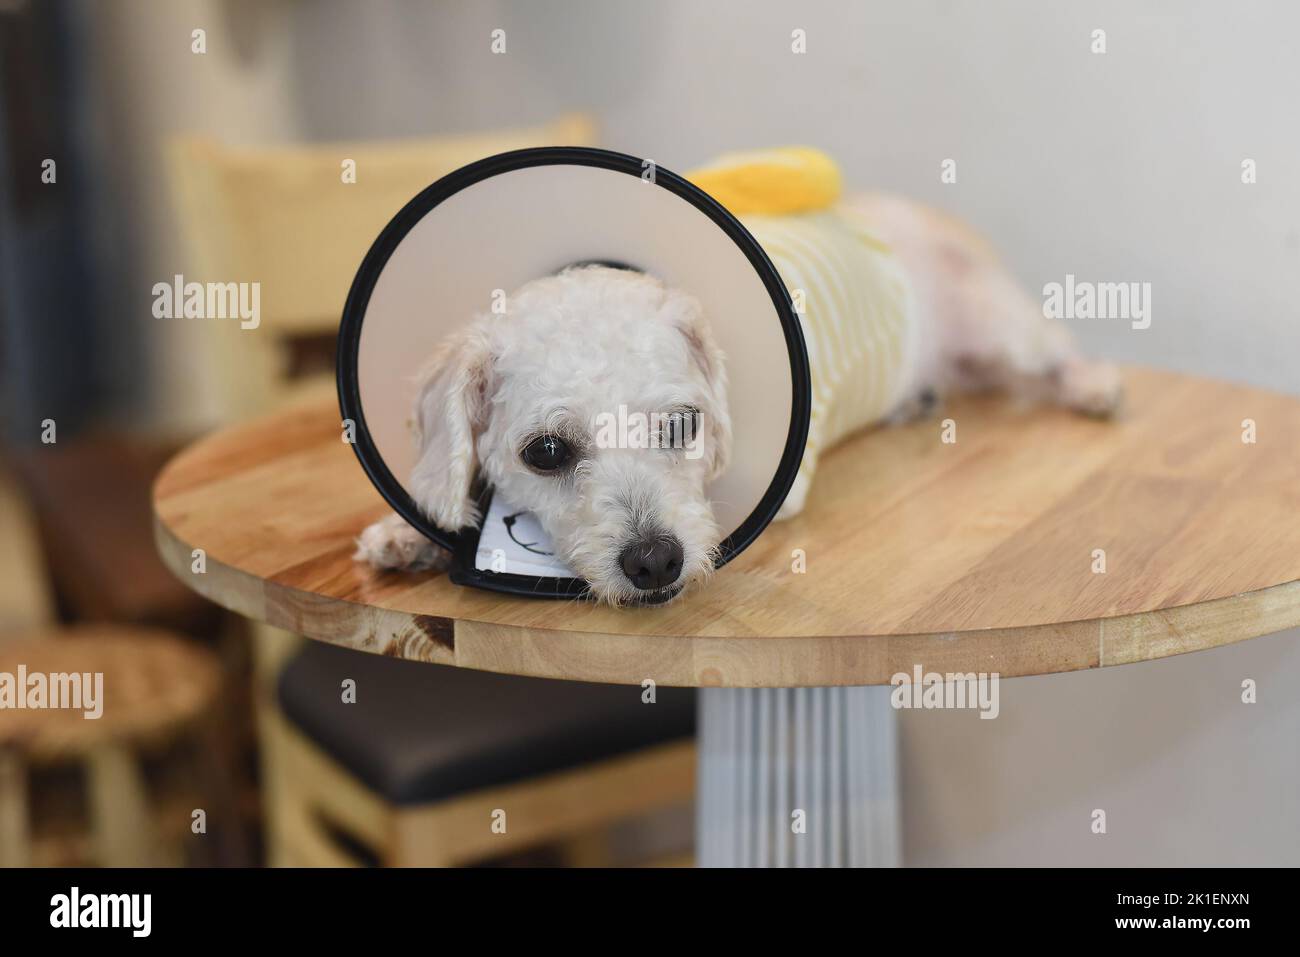 Hand petting sick upset dog wearing Elizabethan plastic cone medical collar around neck for anti bite wound protection Stock Photo